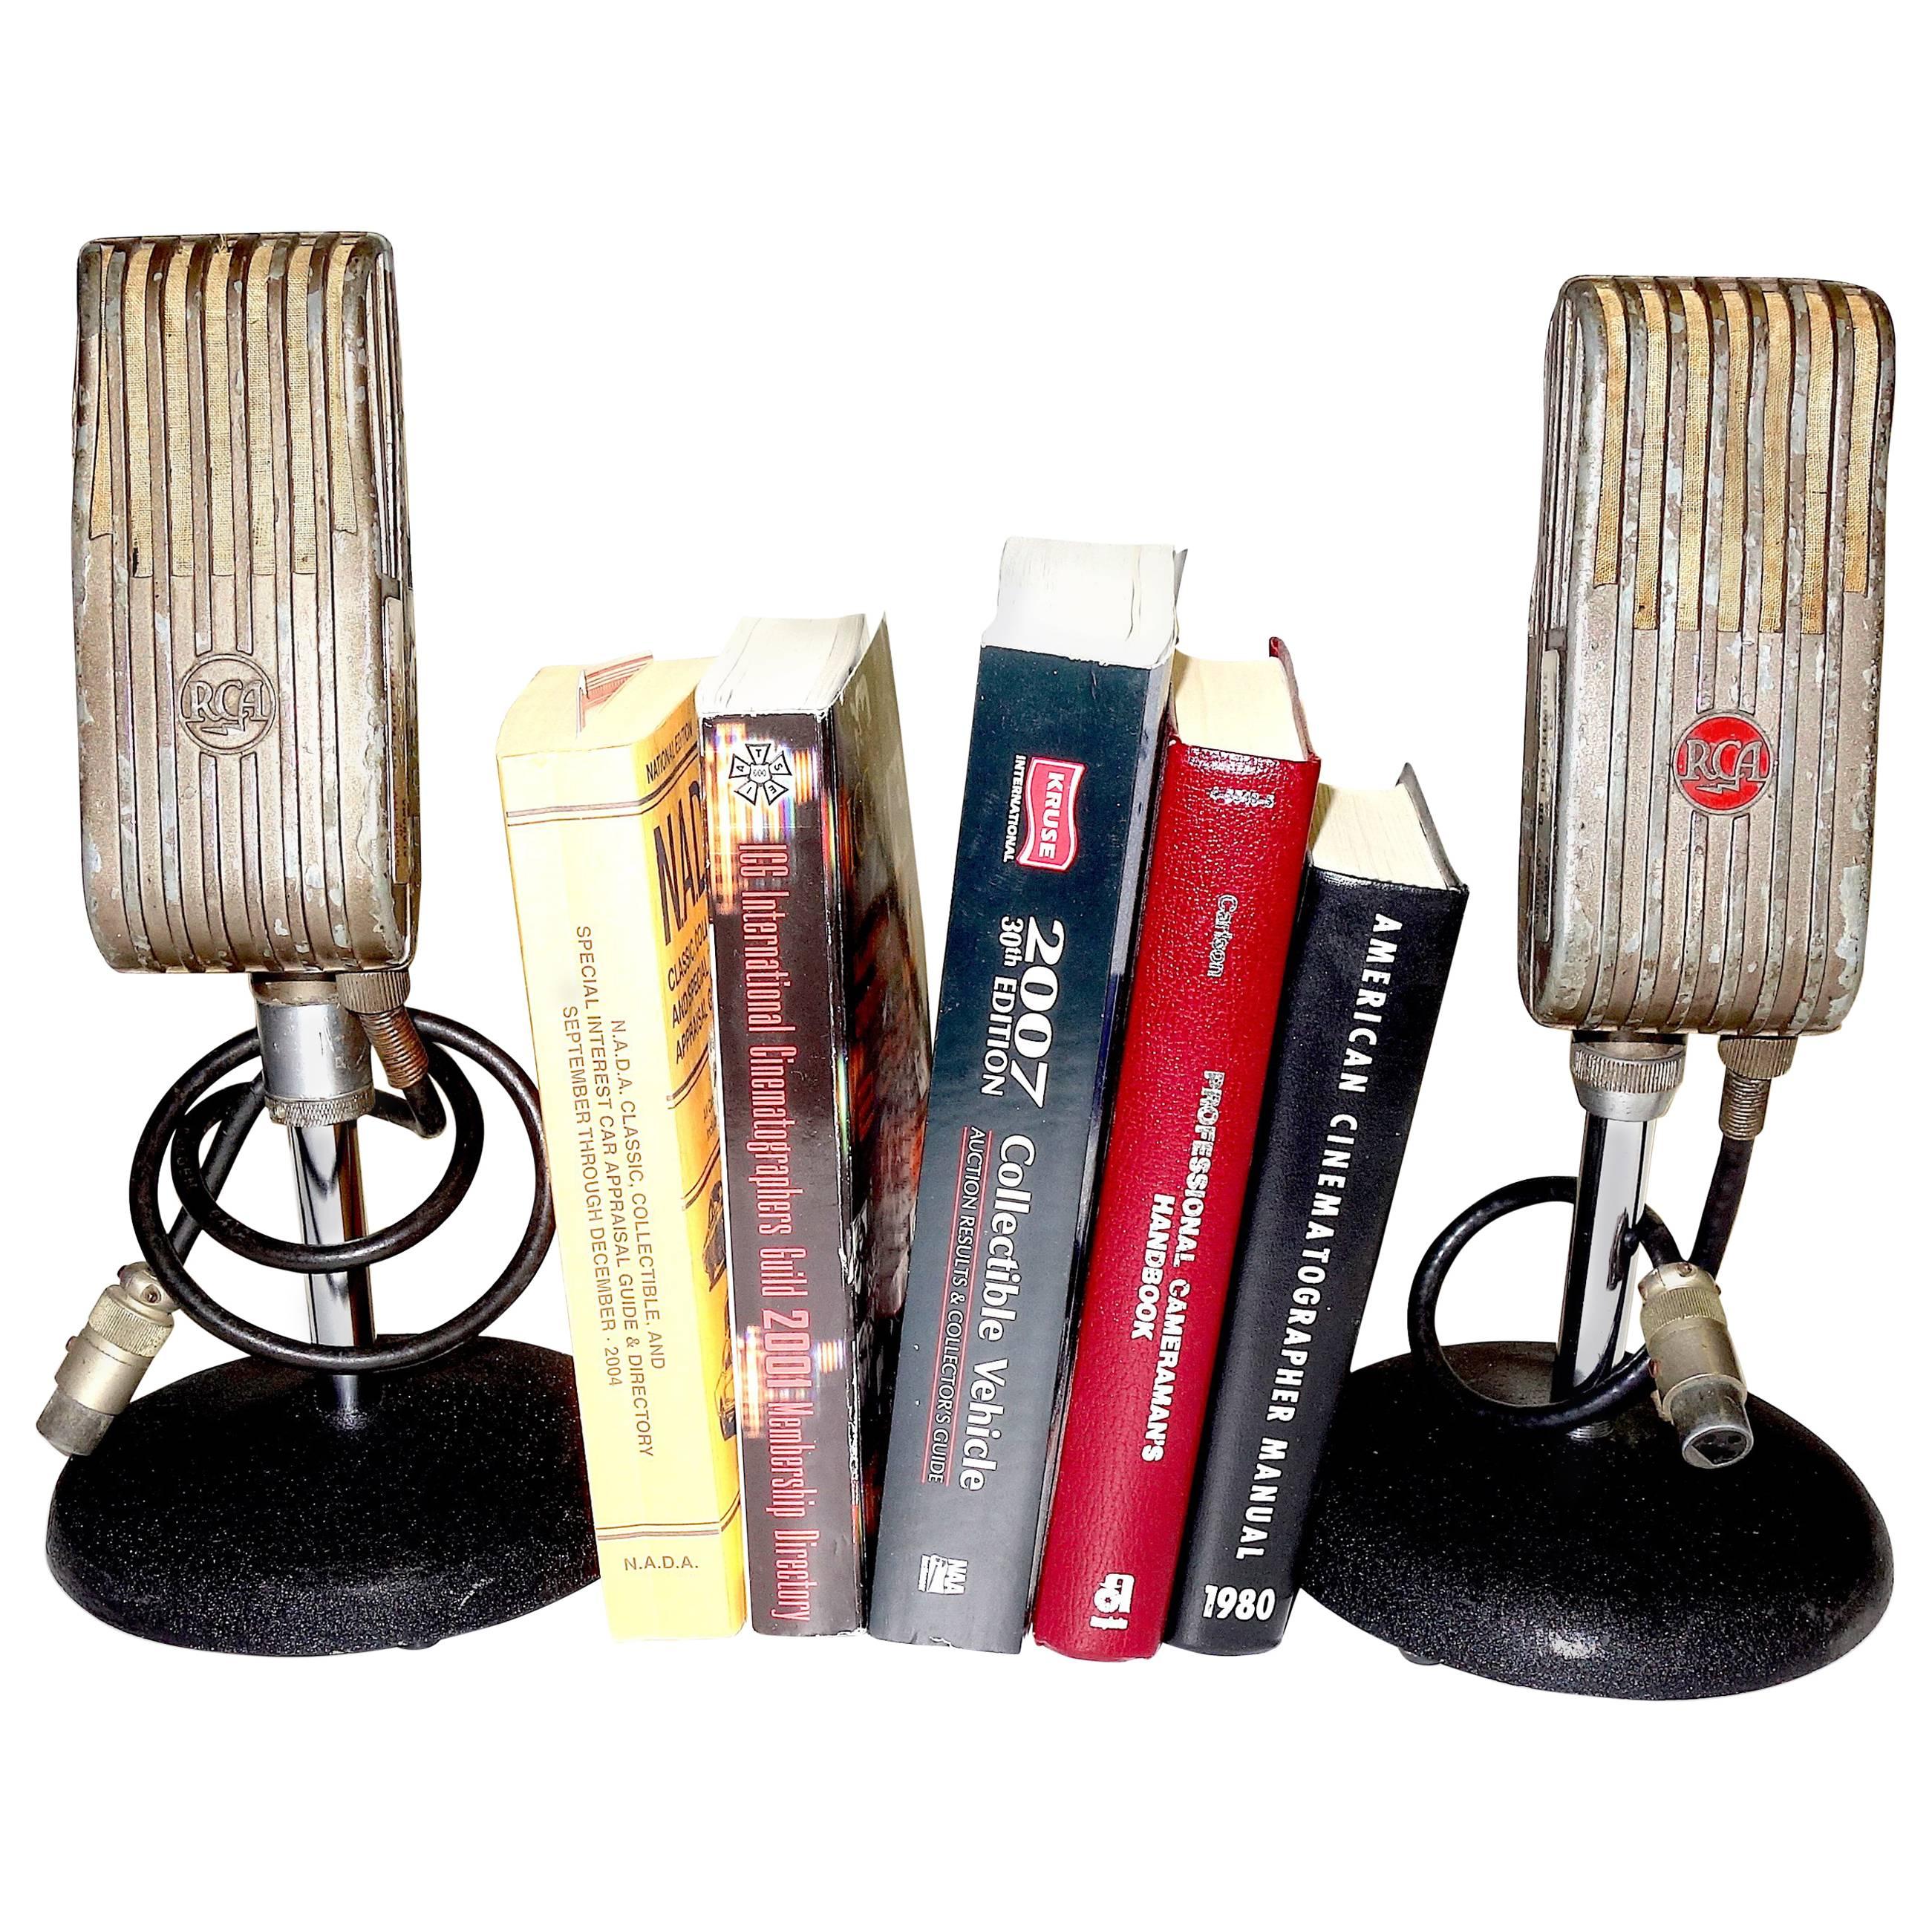 RCA Broadcast Microphones, 1945. As Bookends or Display As Sculpture. ON SALE For Sale